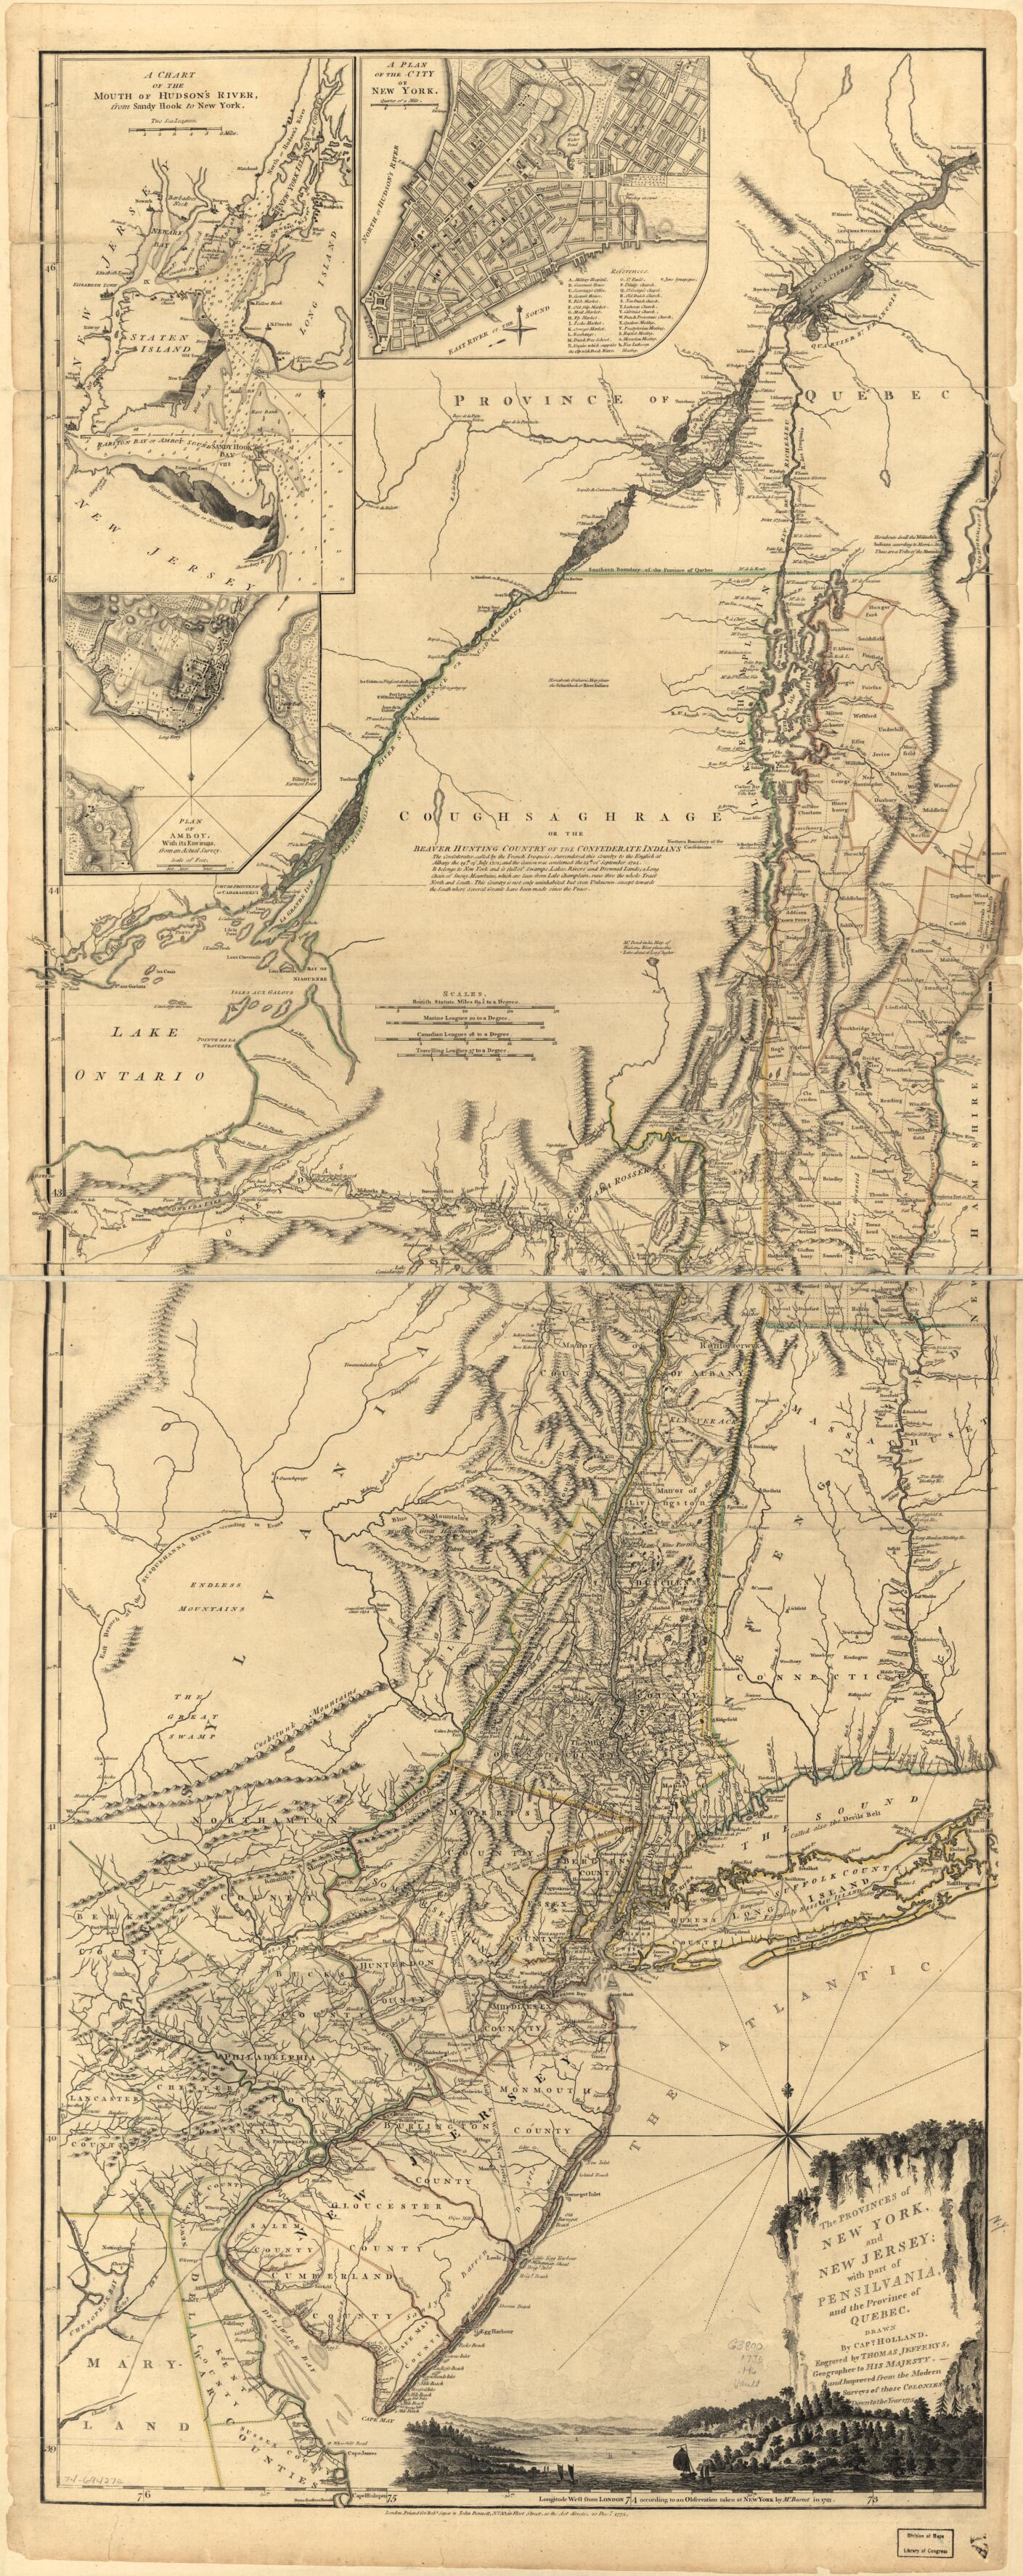 This old map of The Provinces of New York, and New Jersey; With Part of Pensilvania, and the Province of Quebec from 1775 was created by Samuel Holland,  Robert Sayer and John Bennett (Firm) in 1775